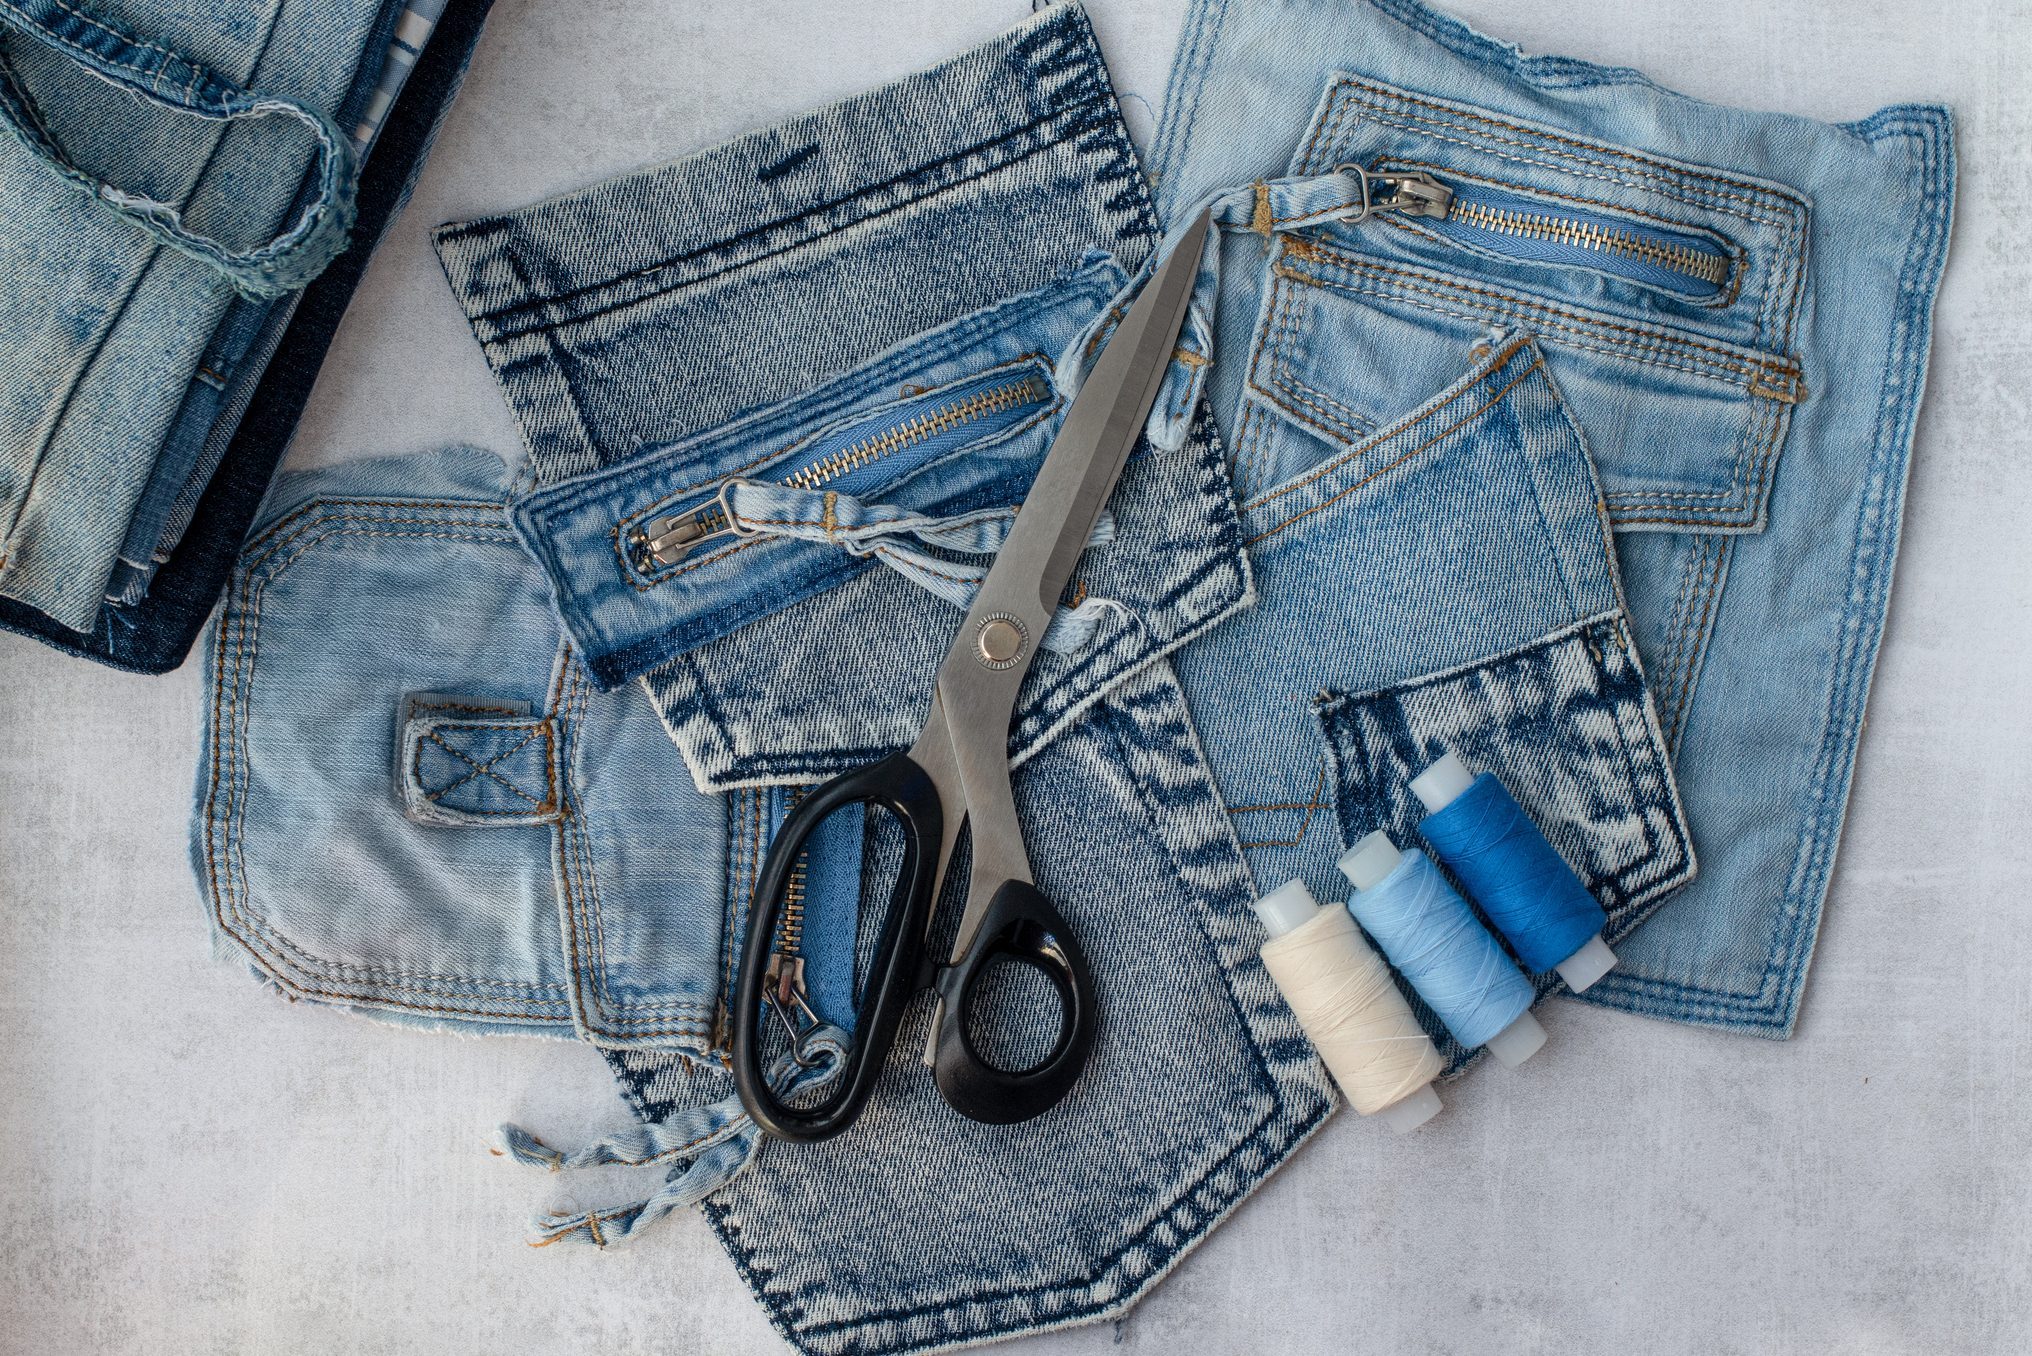 10 Ways to Upcycle Clothes — How to Upcycle Old Jeans, Tees and More